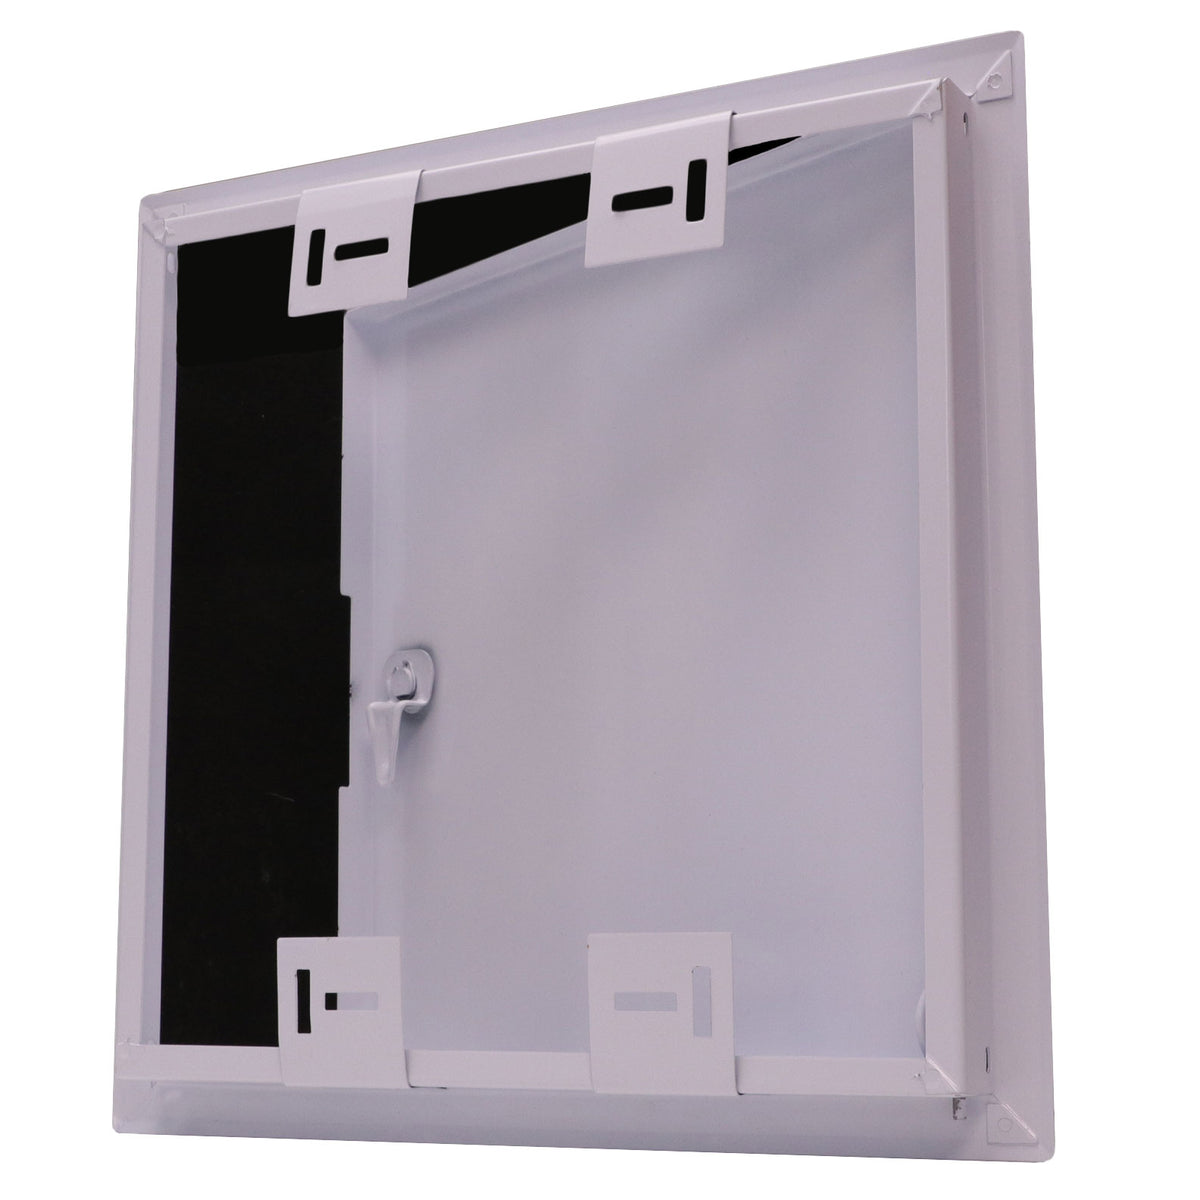 16&quot; X 16&quot; Steel Access Panel Removable Door For Concealed Wall / Ceiling Application With Slotted Lock - [Outer Dimensions: 18&quot; Width X 18&quot; Height]